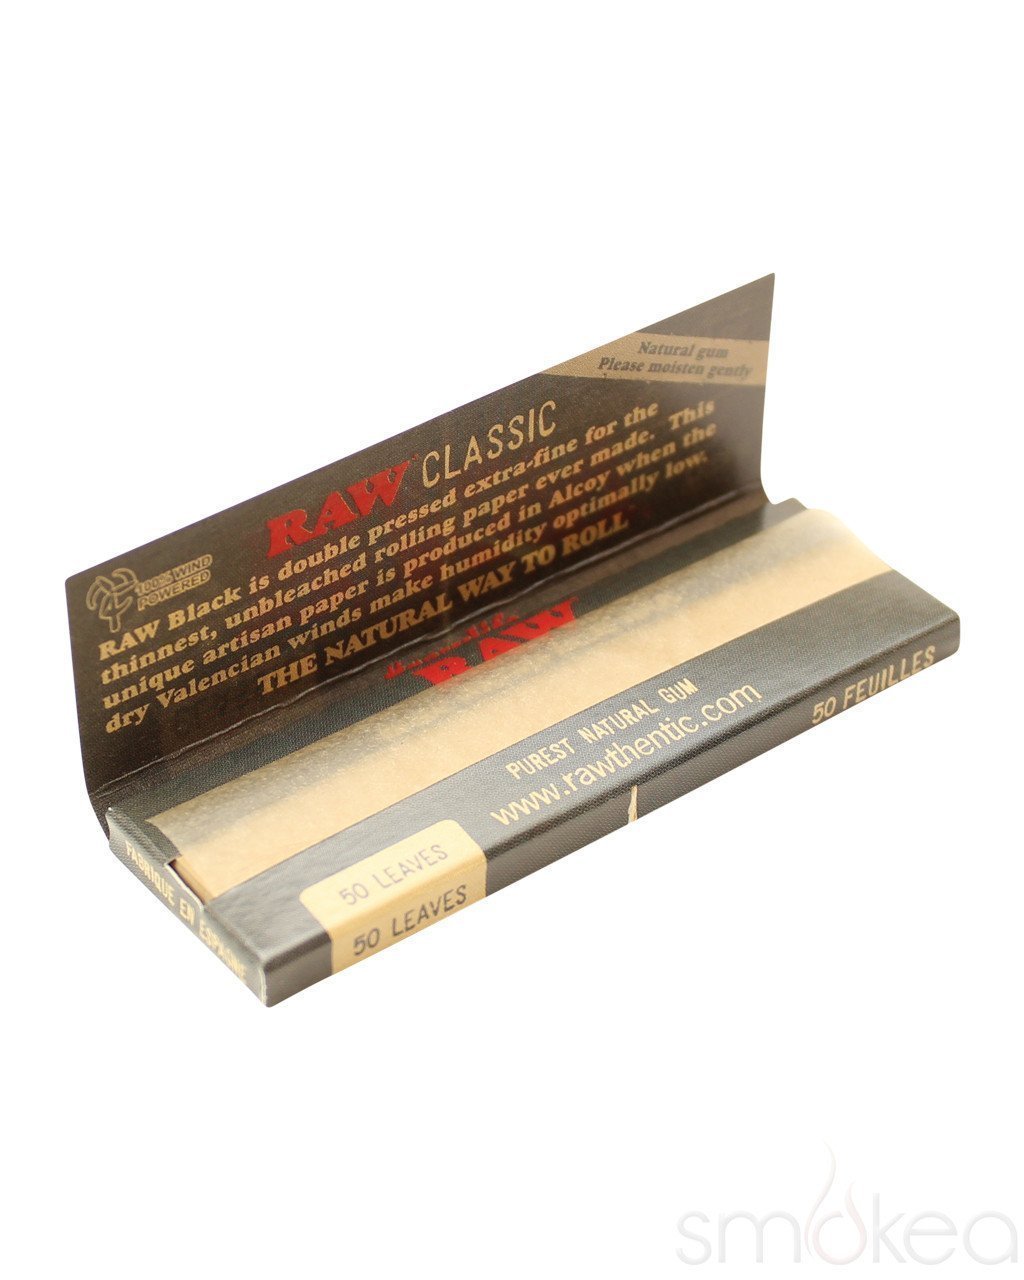 Raw Black Classic 1 1/4 Rolling Papers (Full Box)